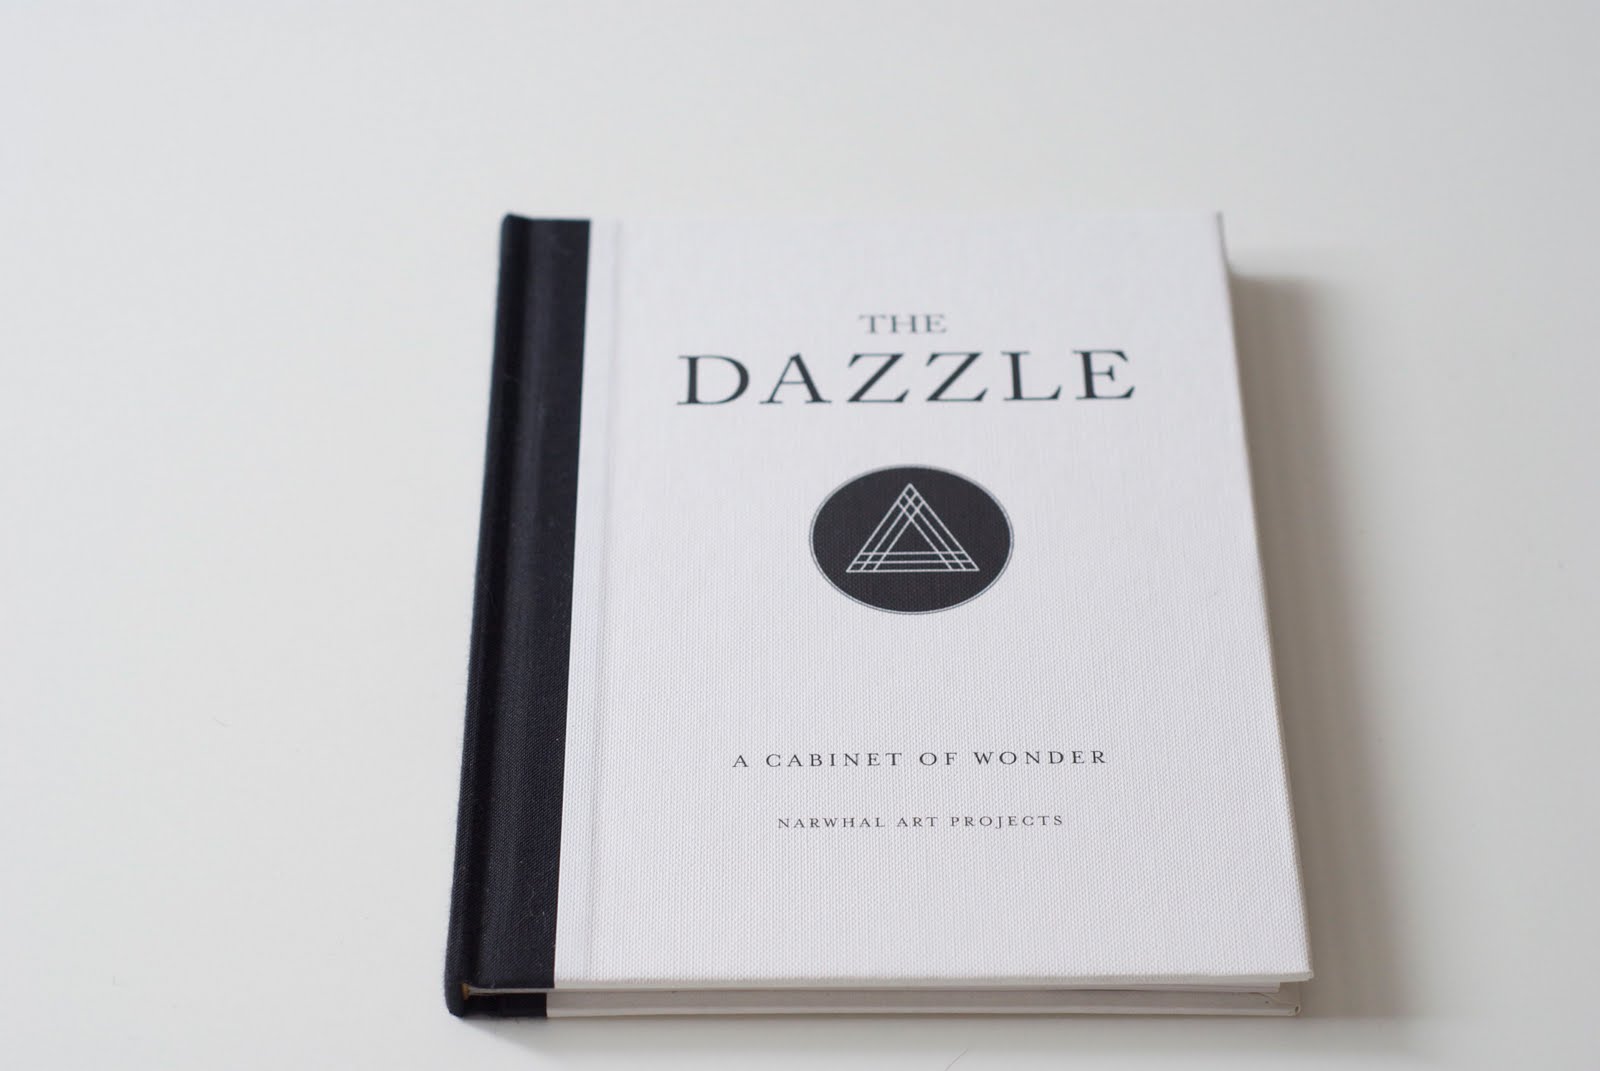 The Dazzle Book by Narwhal Art Projects